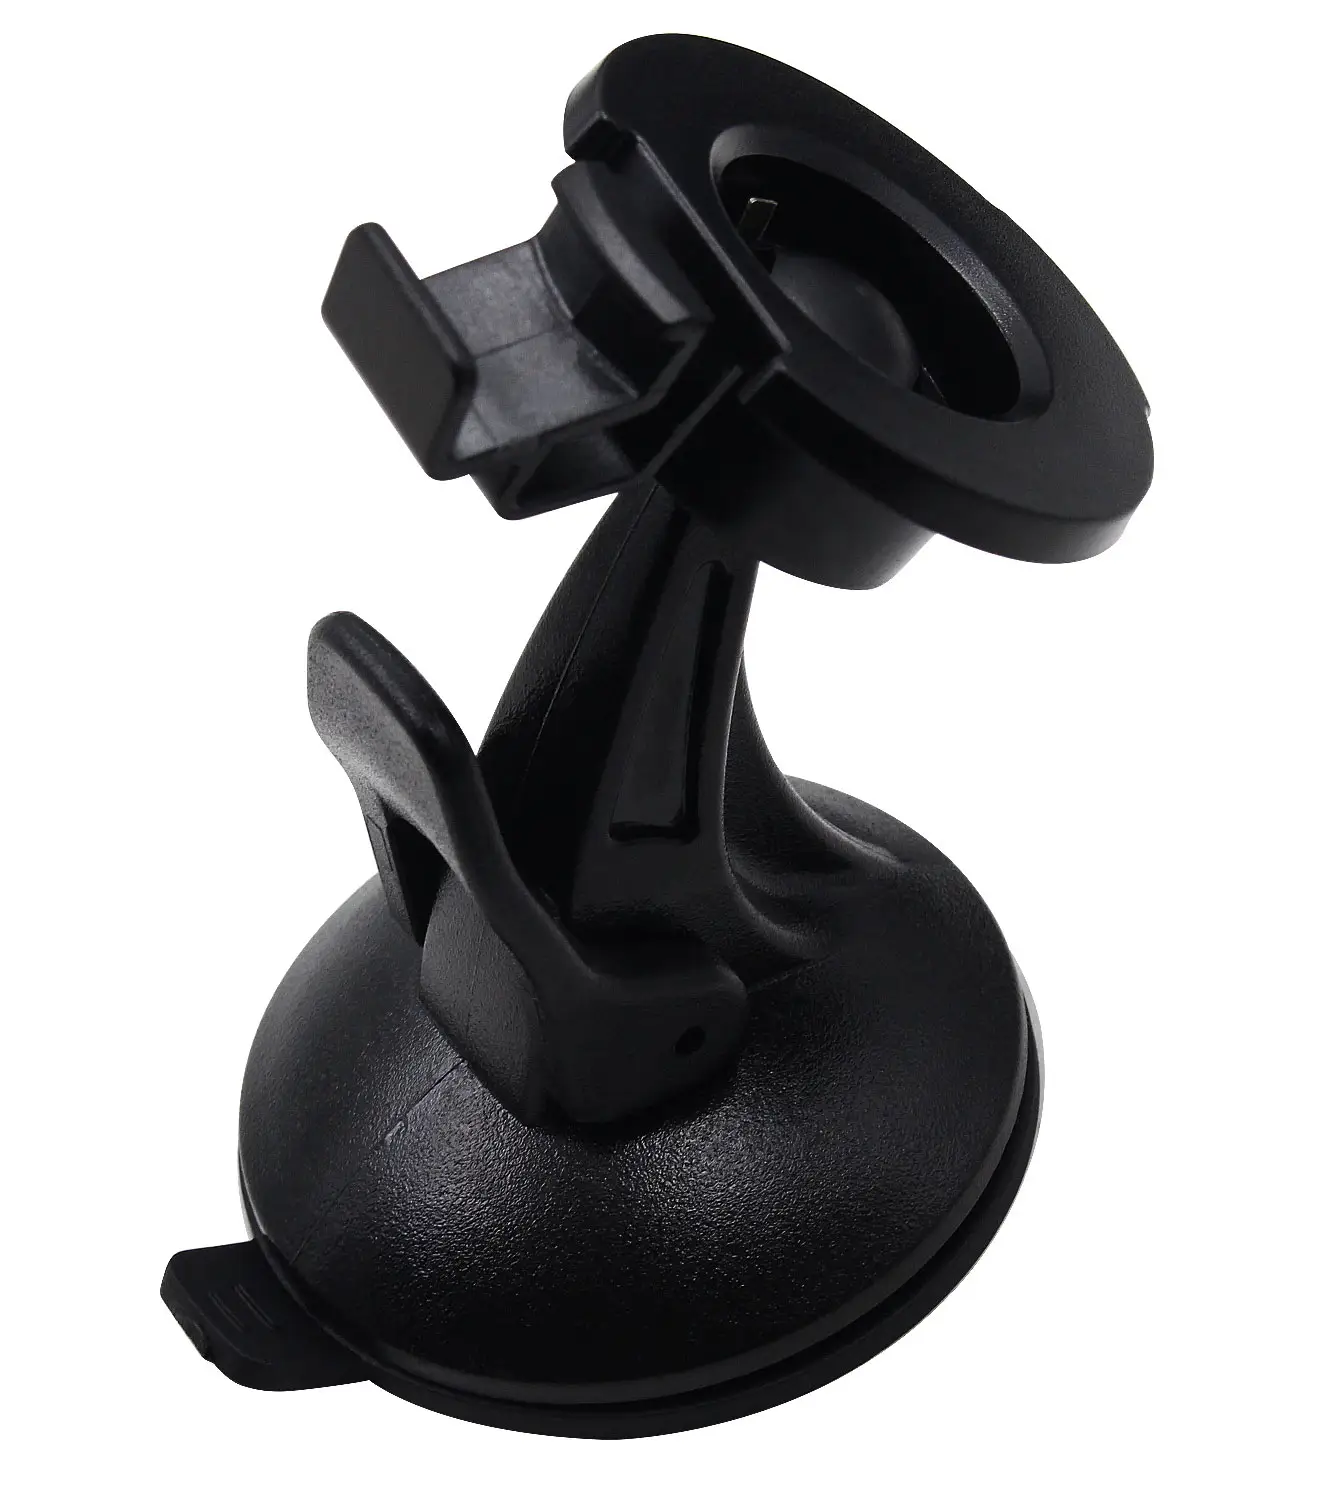 New Car Suction Cup GPS Holder Mount for 54lm 55 55lm 55lmt 56 56lm